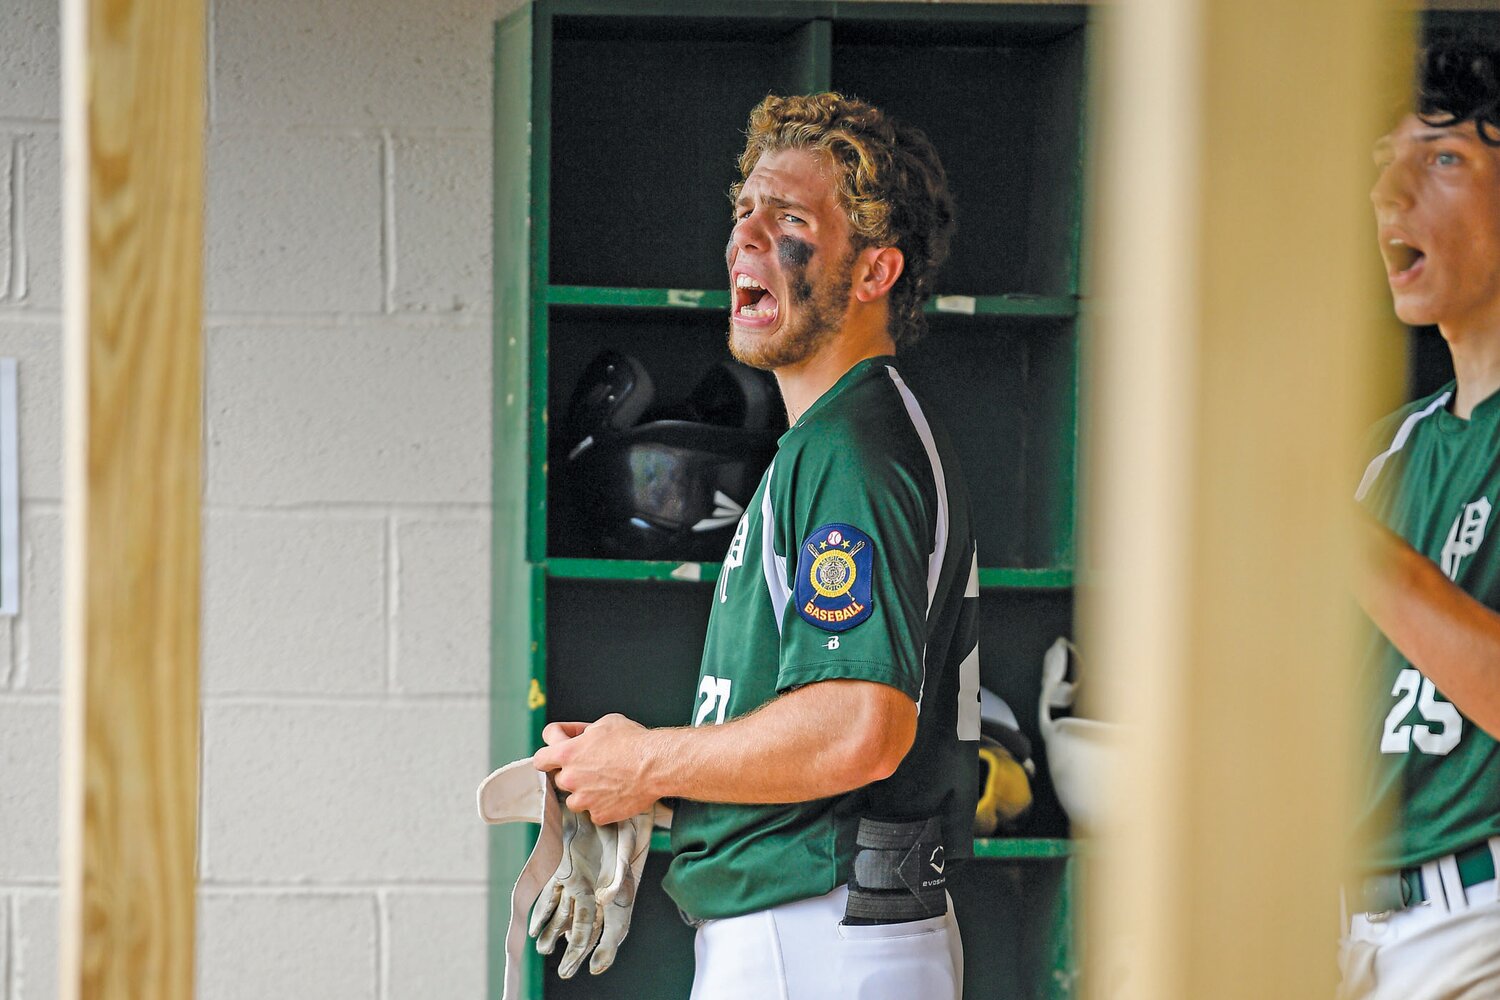 Pennridge’s Nate Lapp shouts from the dugout during the seven-run outburst in the fourth inning of Game 1.